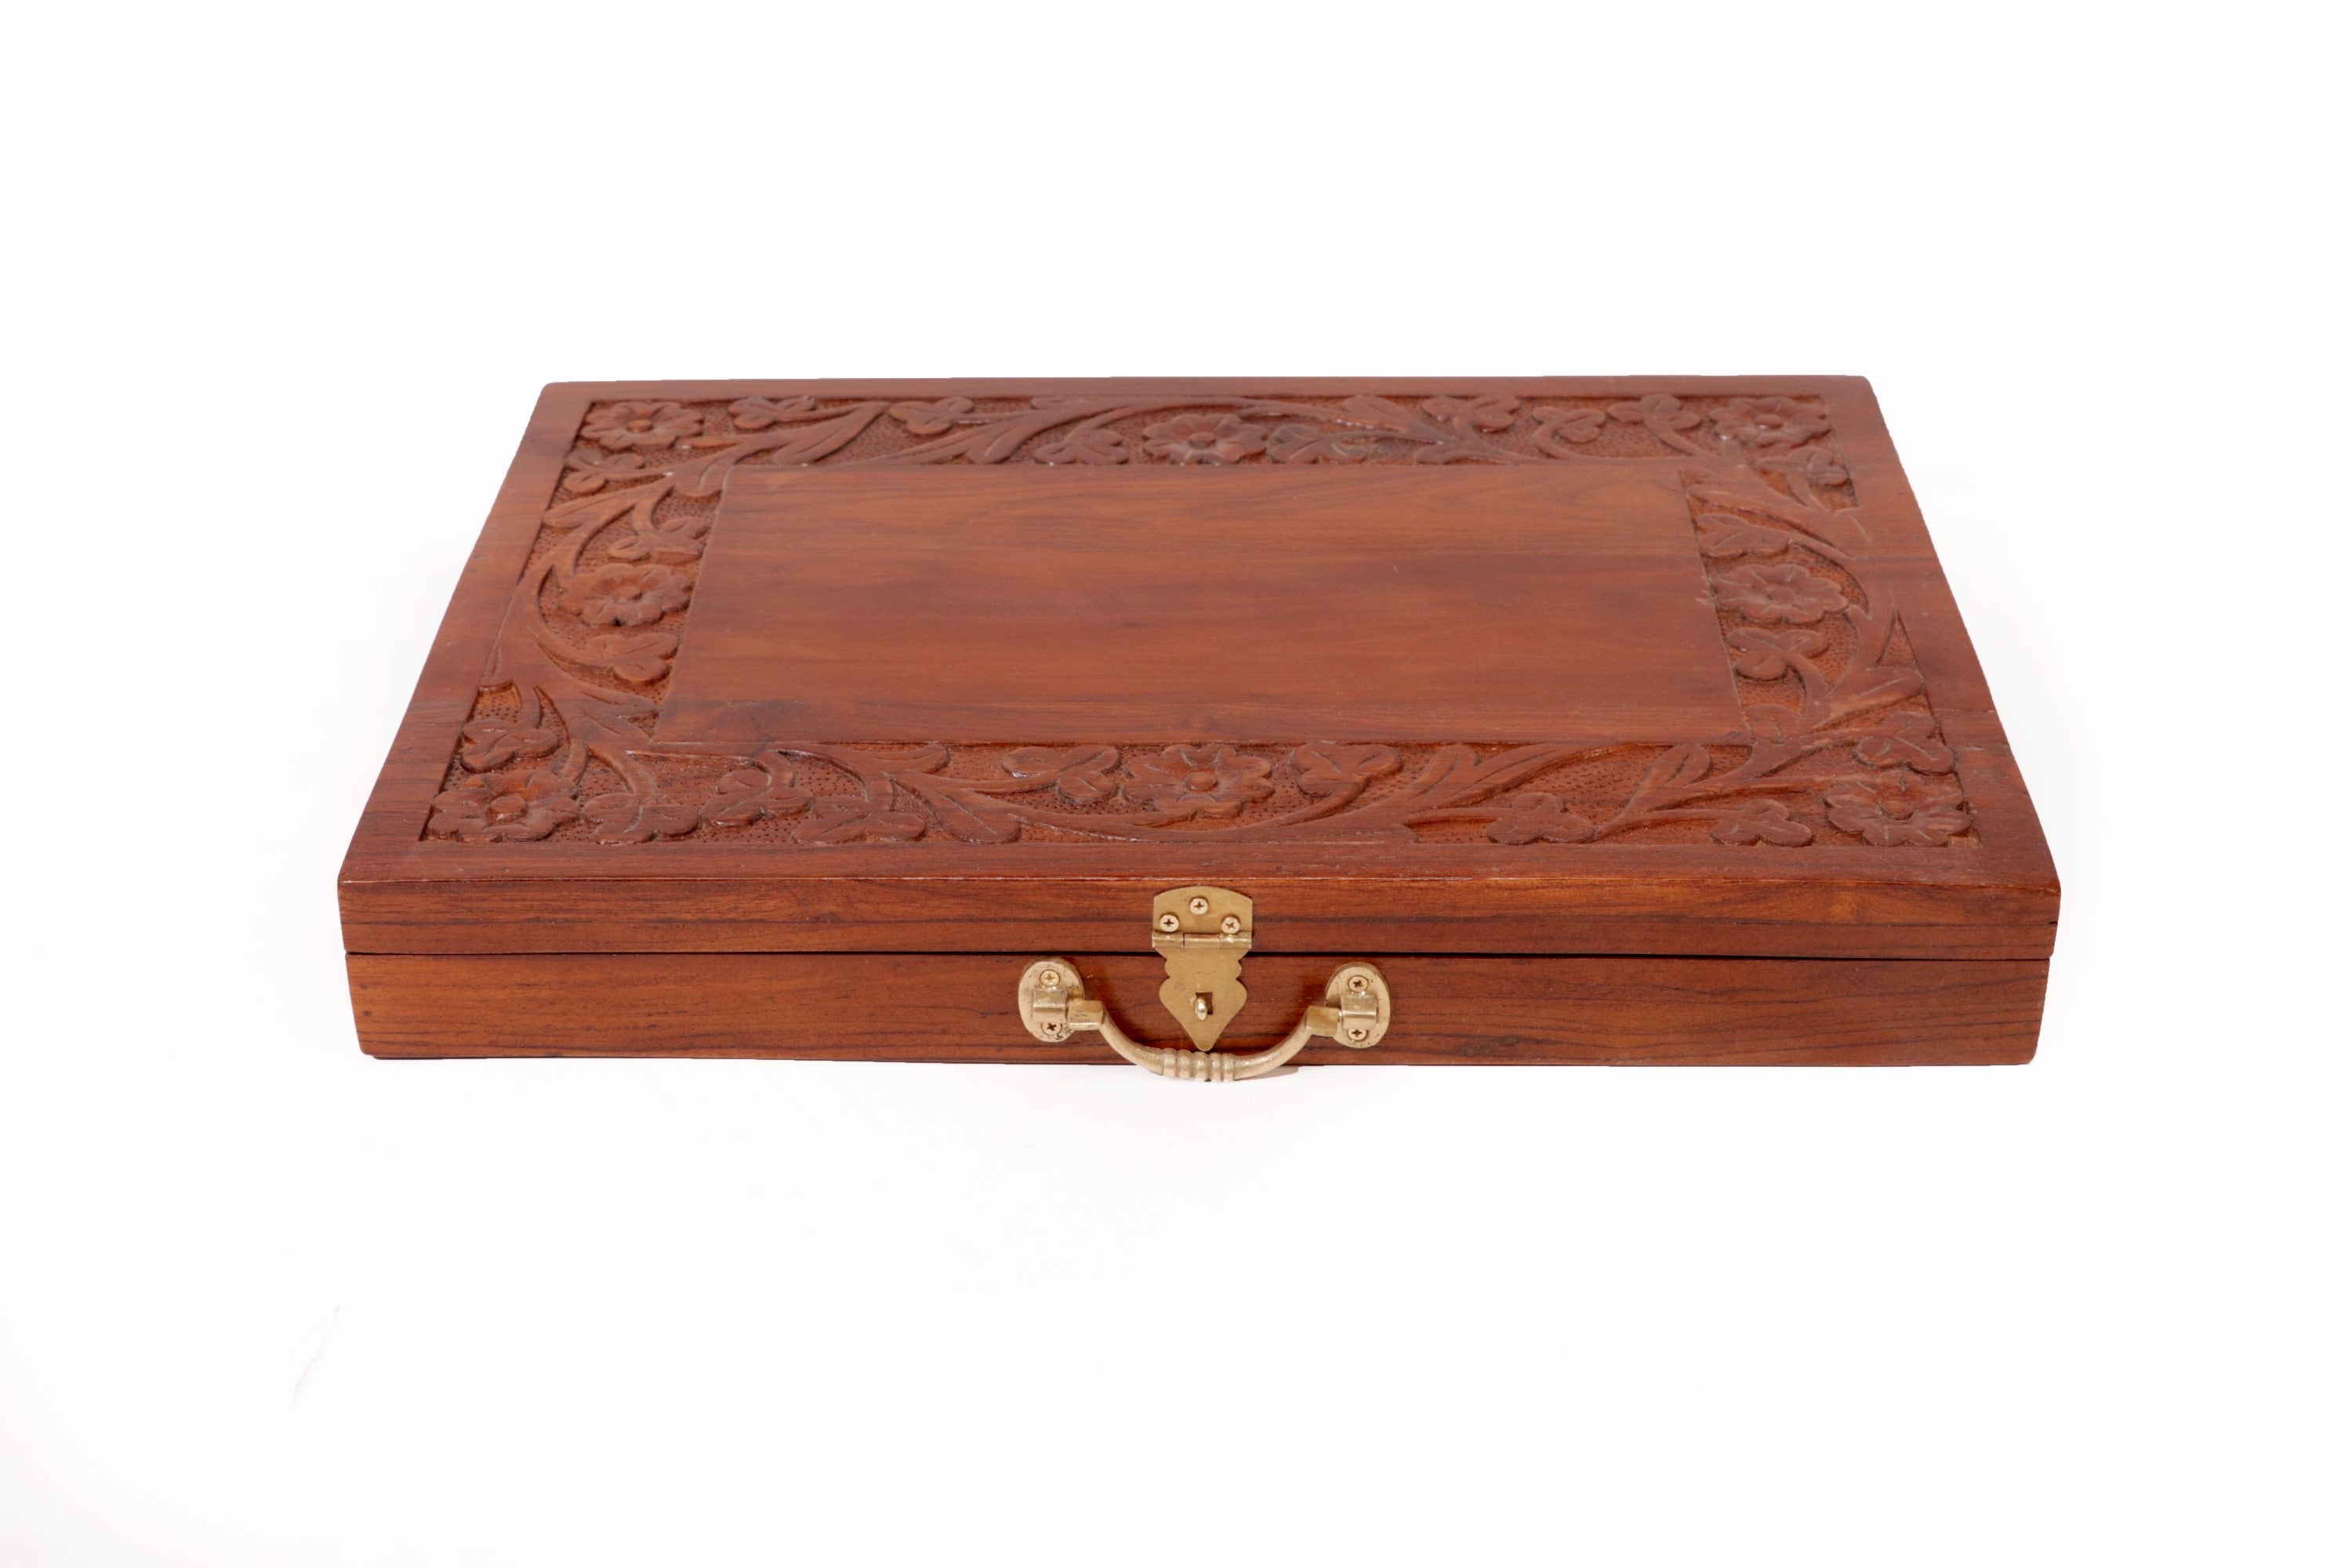 Wooden Carved Flower Petal Box Wooden Box